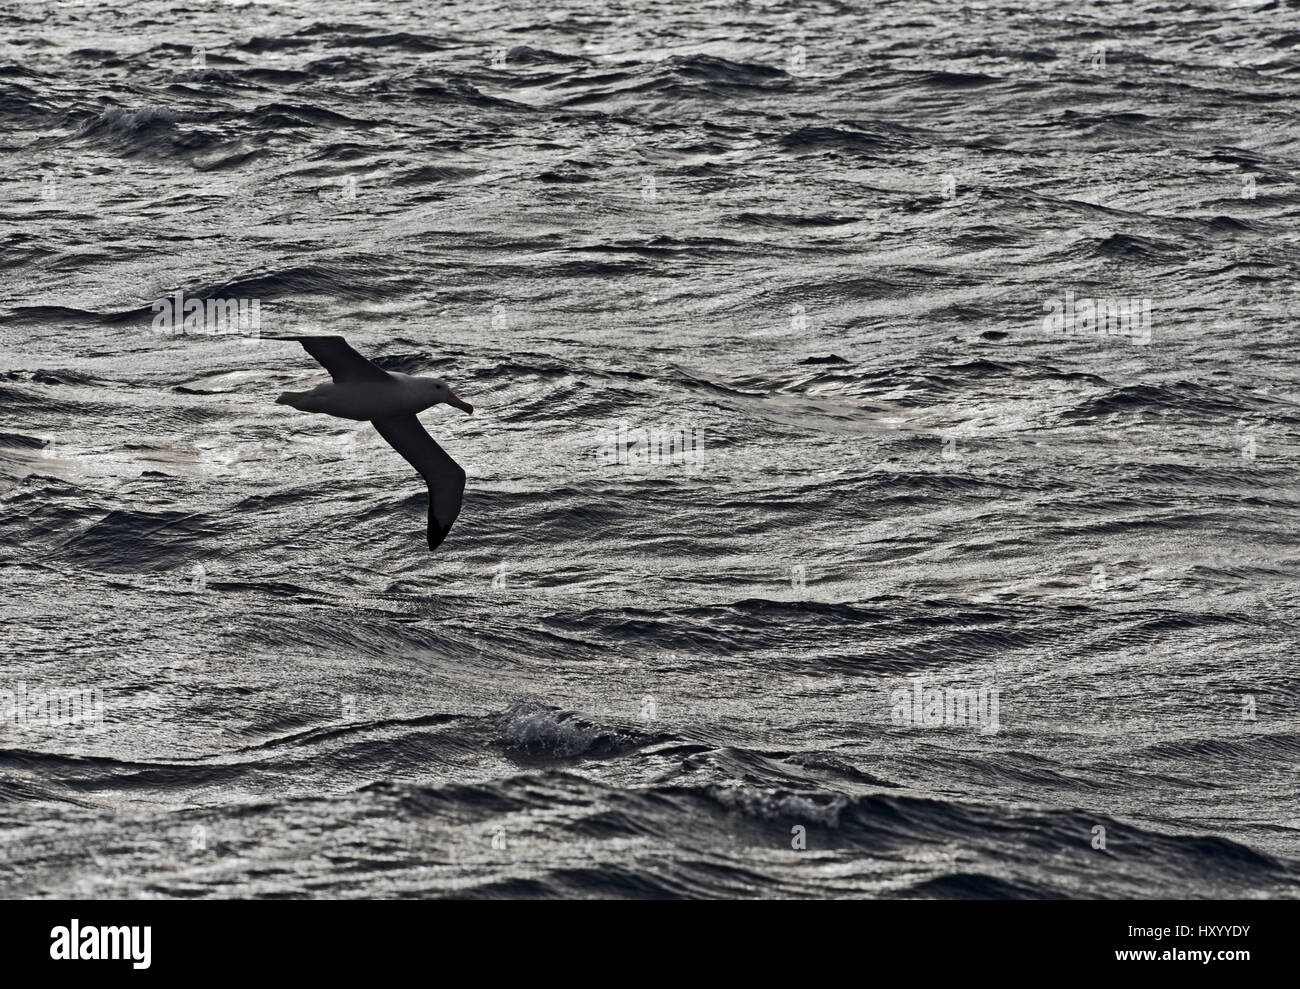 Wandering albatross (Diomedea exulans) silhouetted against Southern Ocean, South Georgia. January. Stock Photo